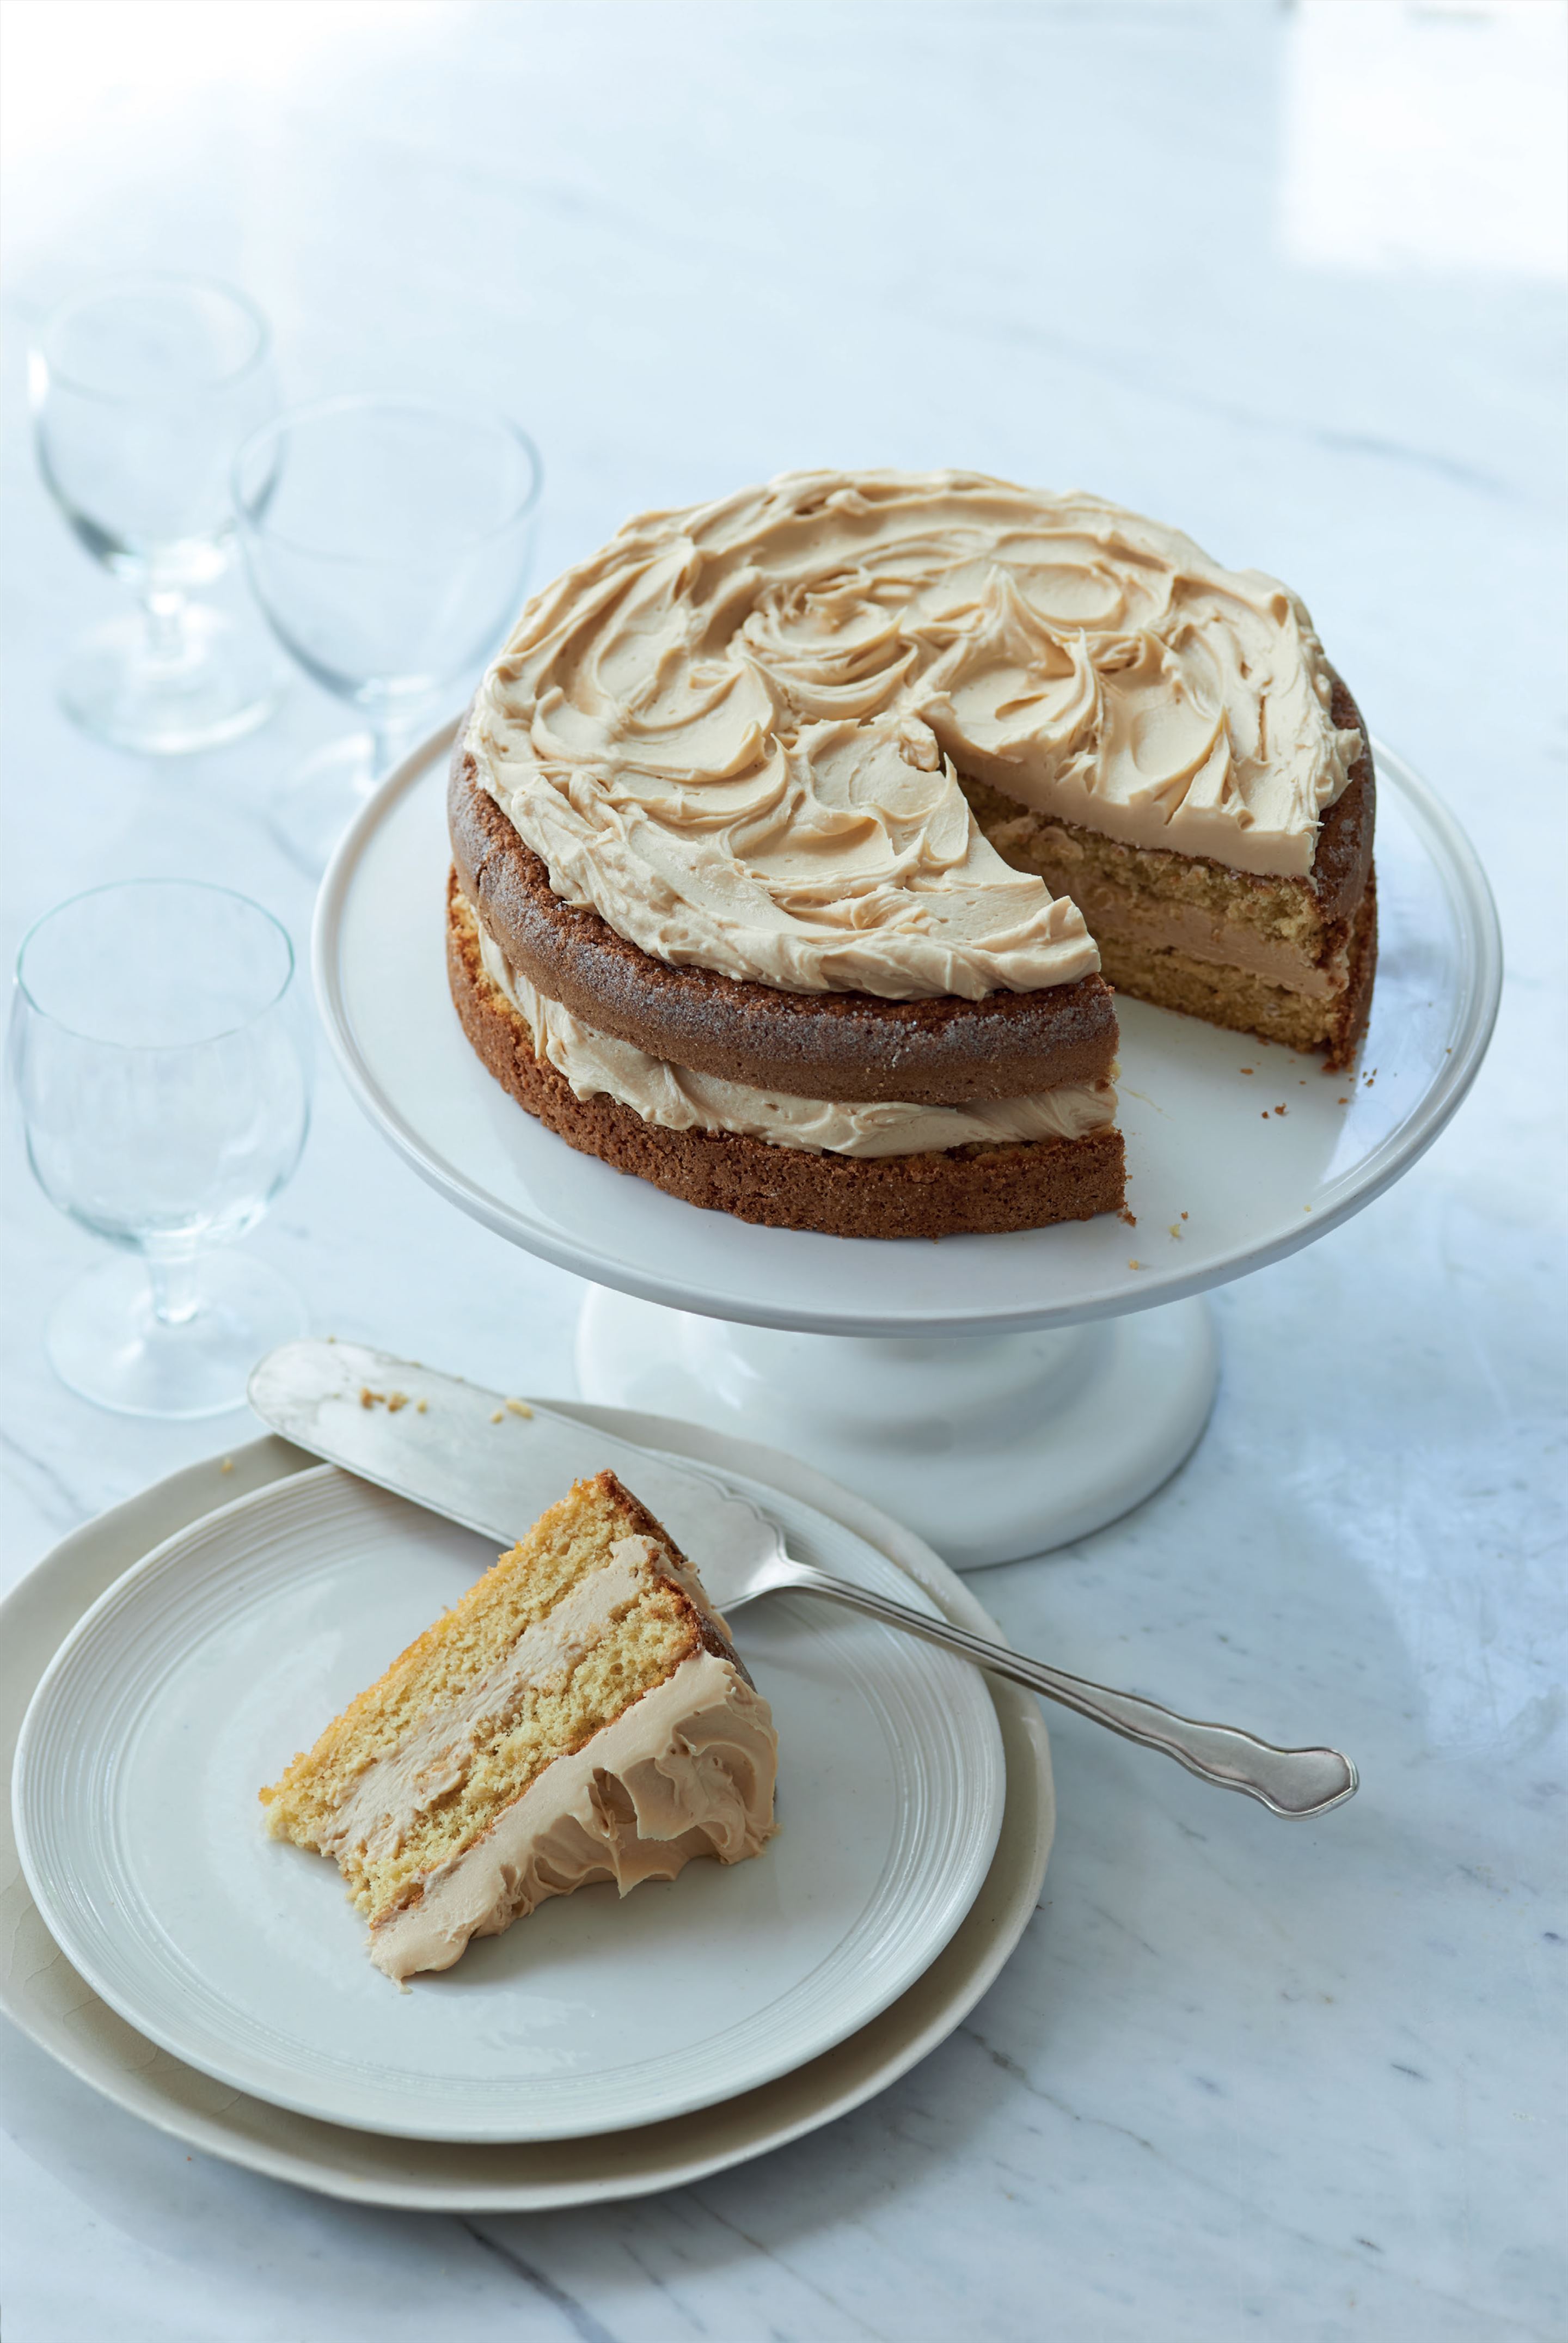 Caramel genoise with salted caramel frosting